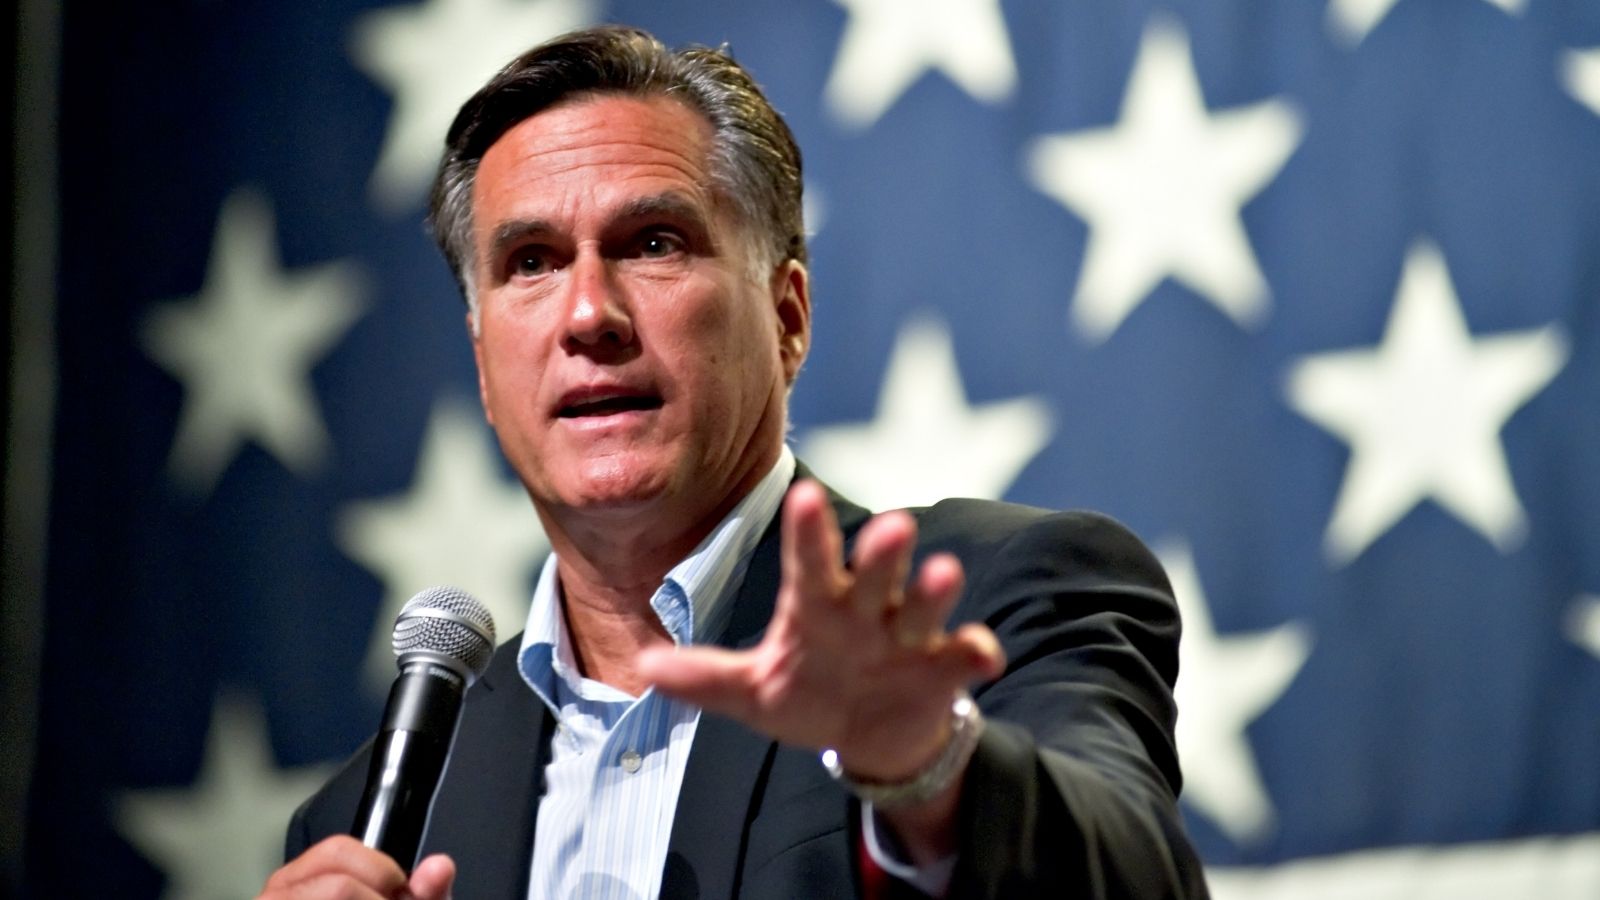 “A Very Large Portion” of Republicans Don’t “Believe in the Constitution”: Mitt Romney